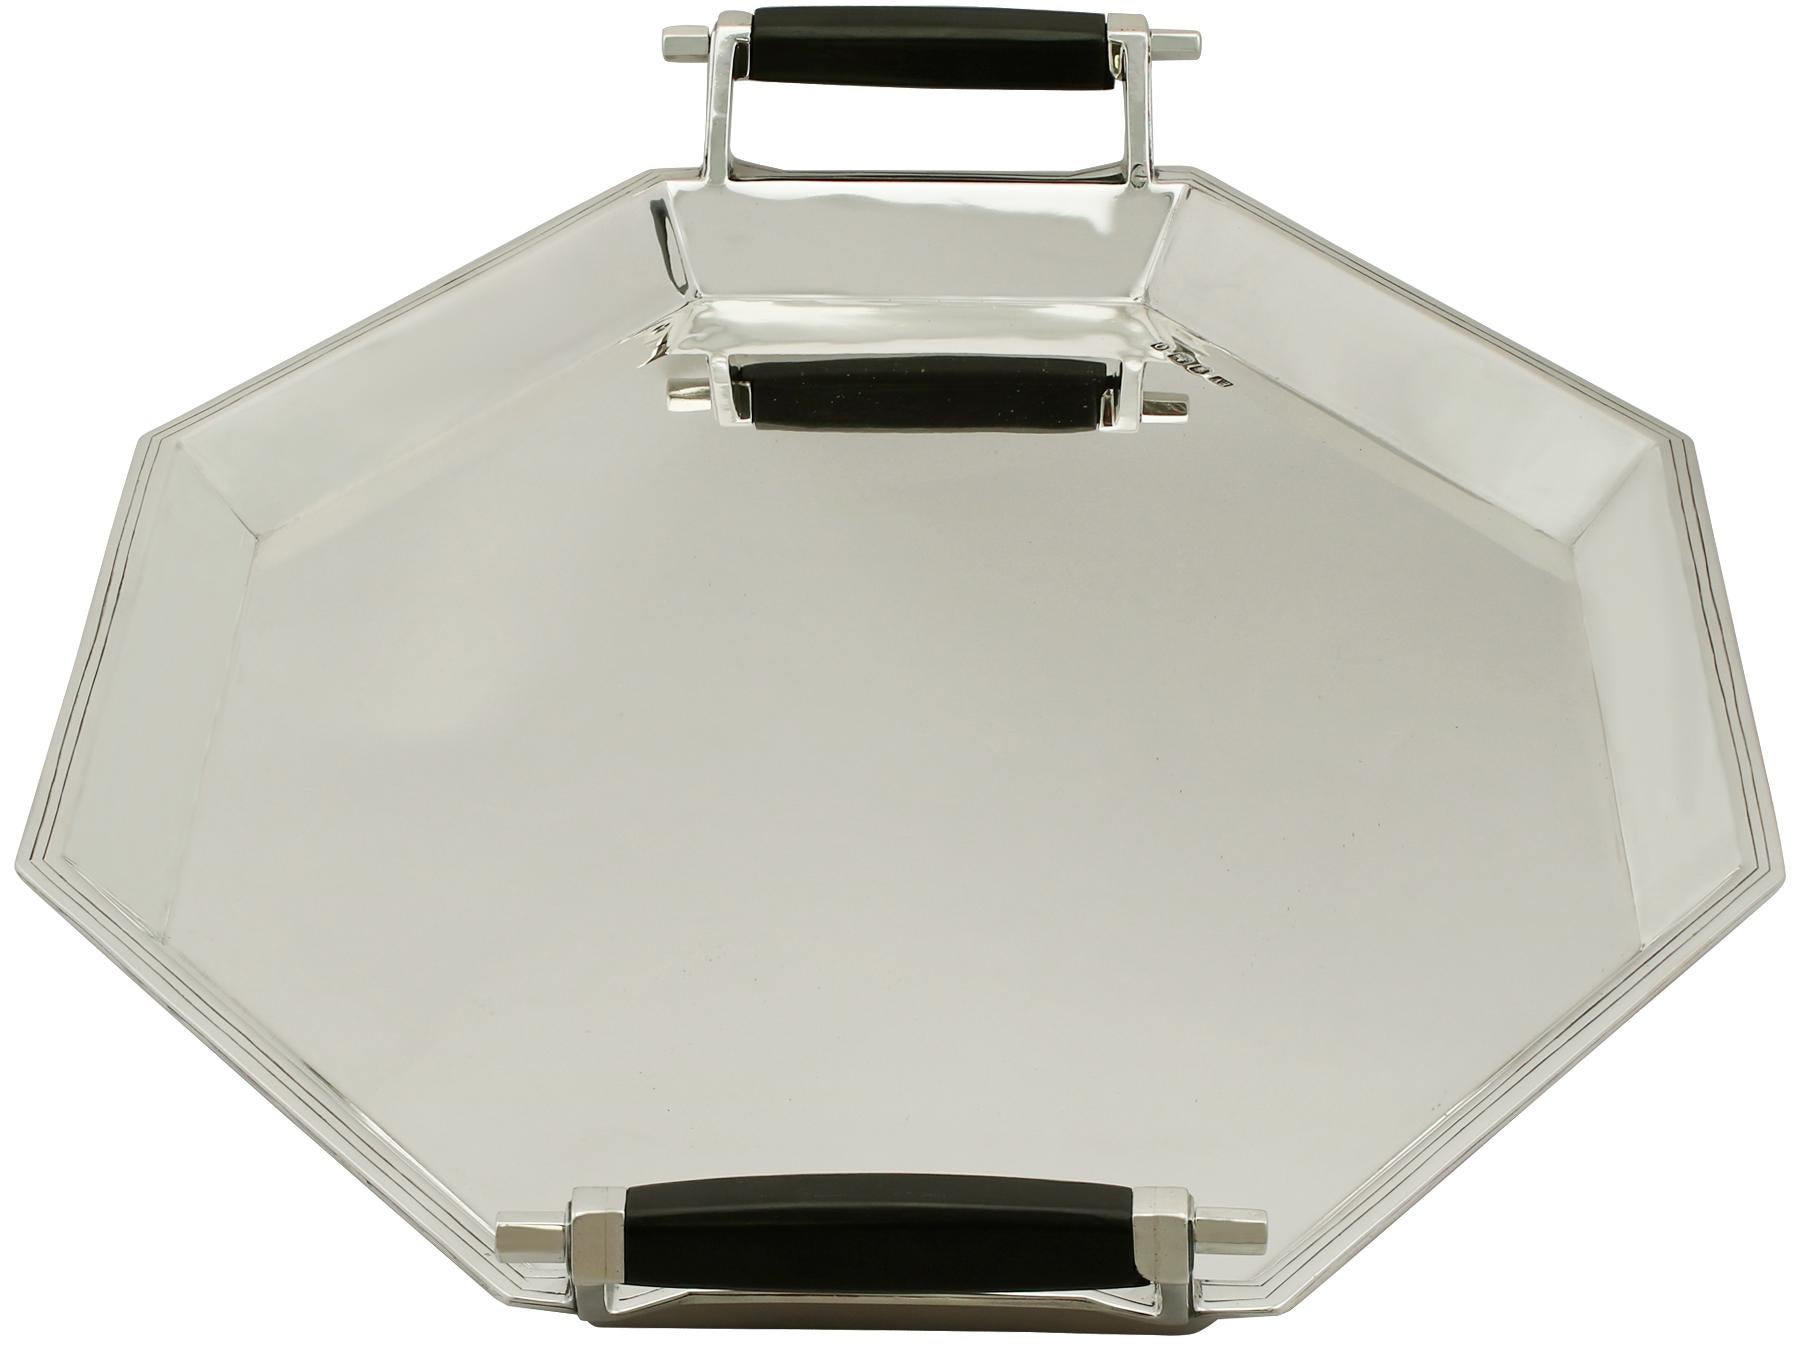 Mid-20th Century Vintage Art Deco Style English Sterling Silver Tray by Viner's Ltd